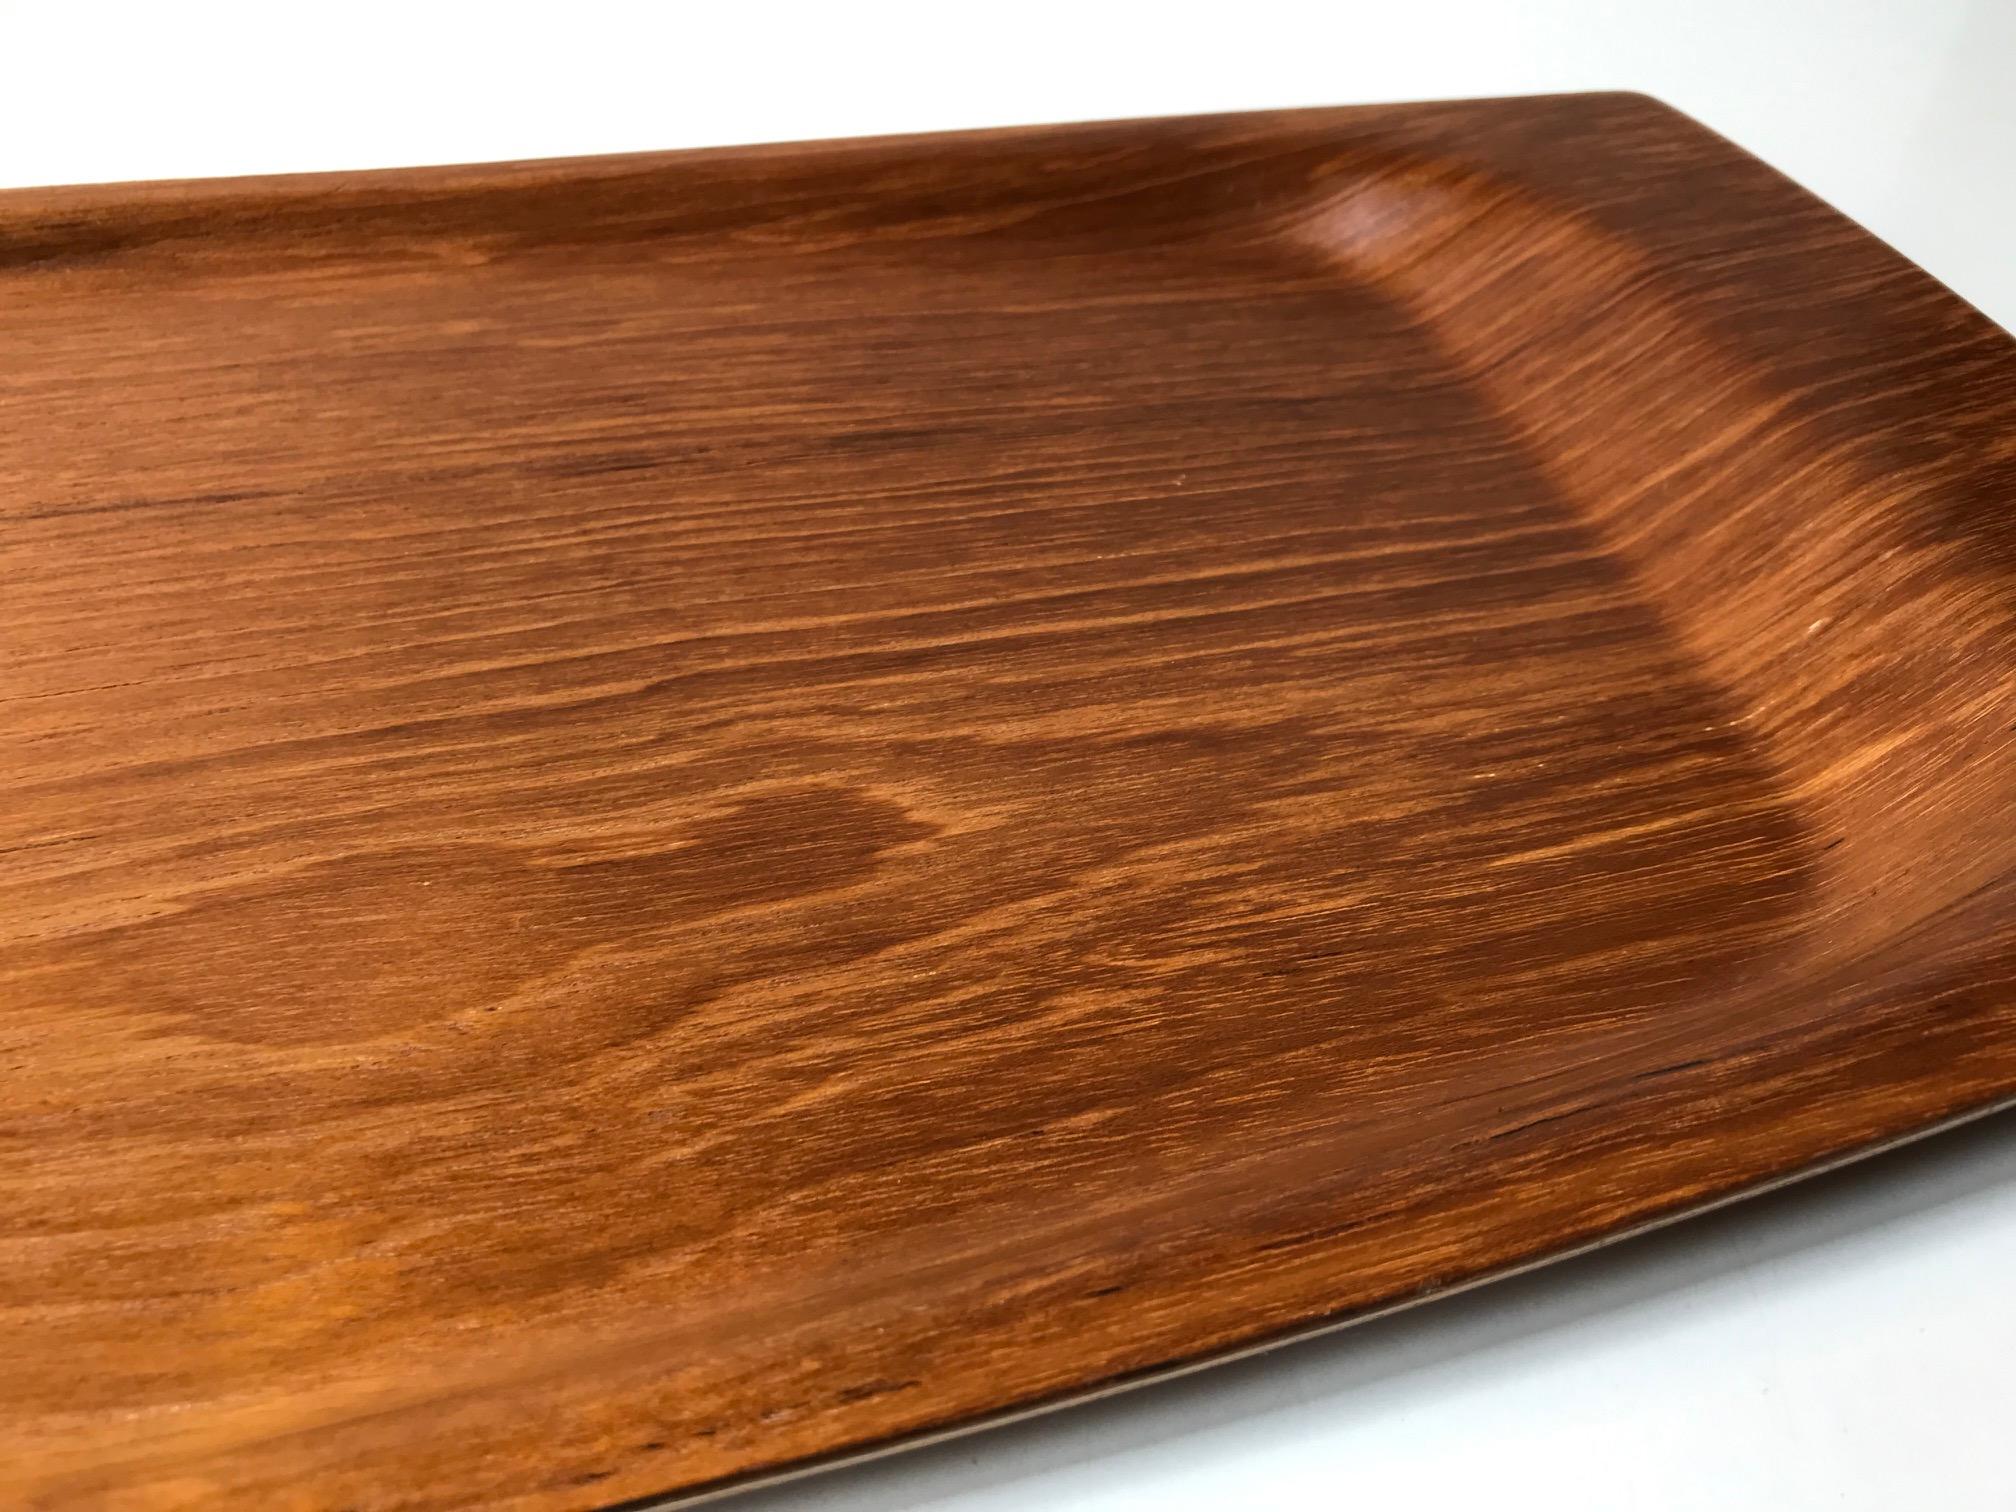 Large serving tray made from teak veneer. Suitable for bed serving set due to its size and raised edges. It was made in Denmark during the 1960s by Langva.